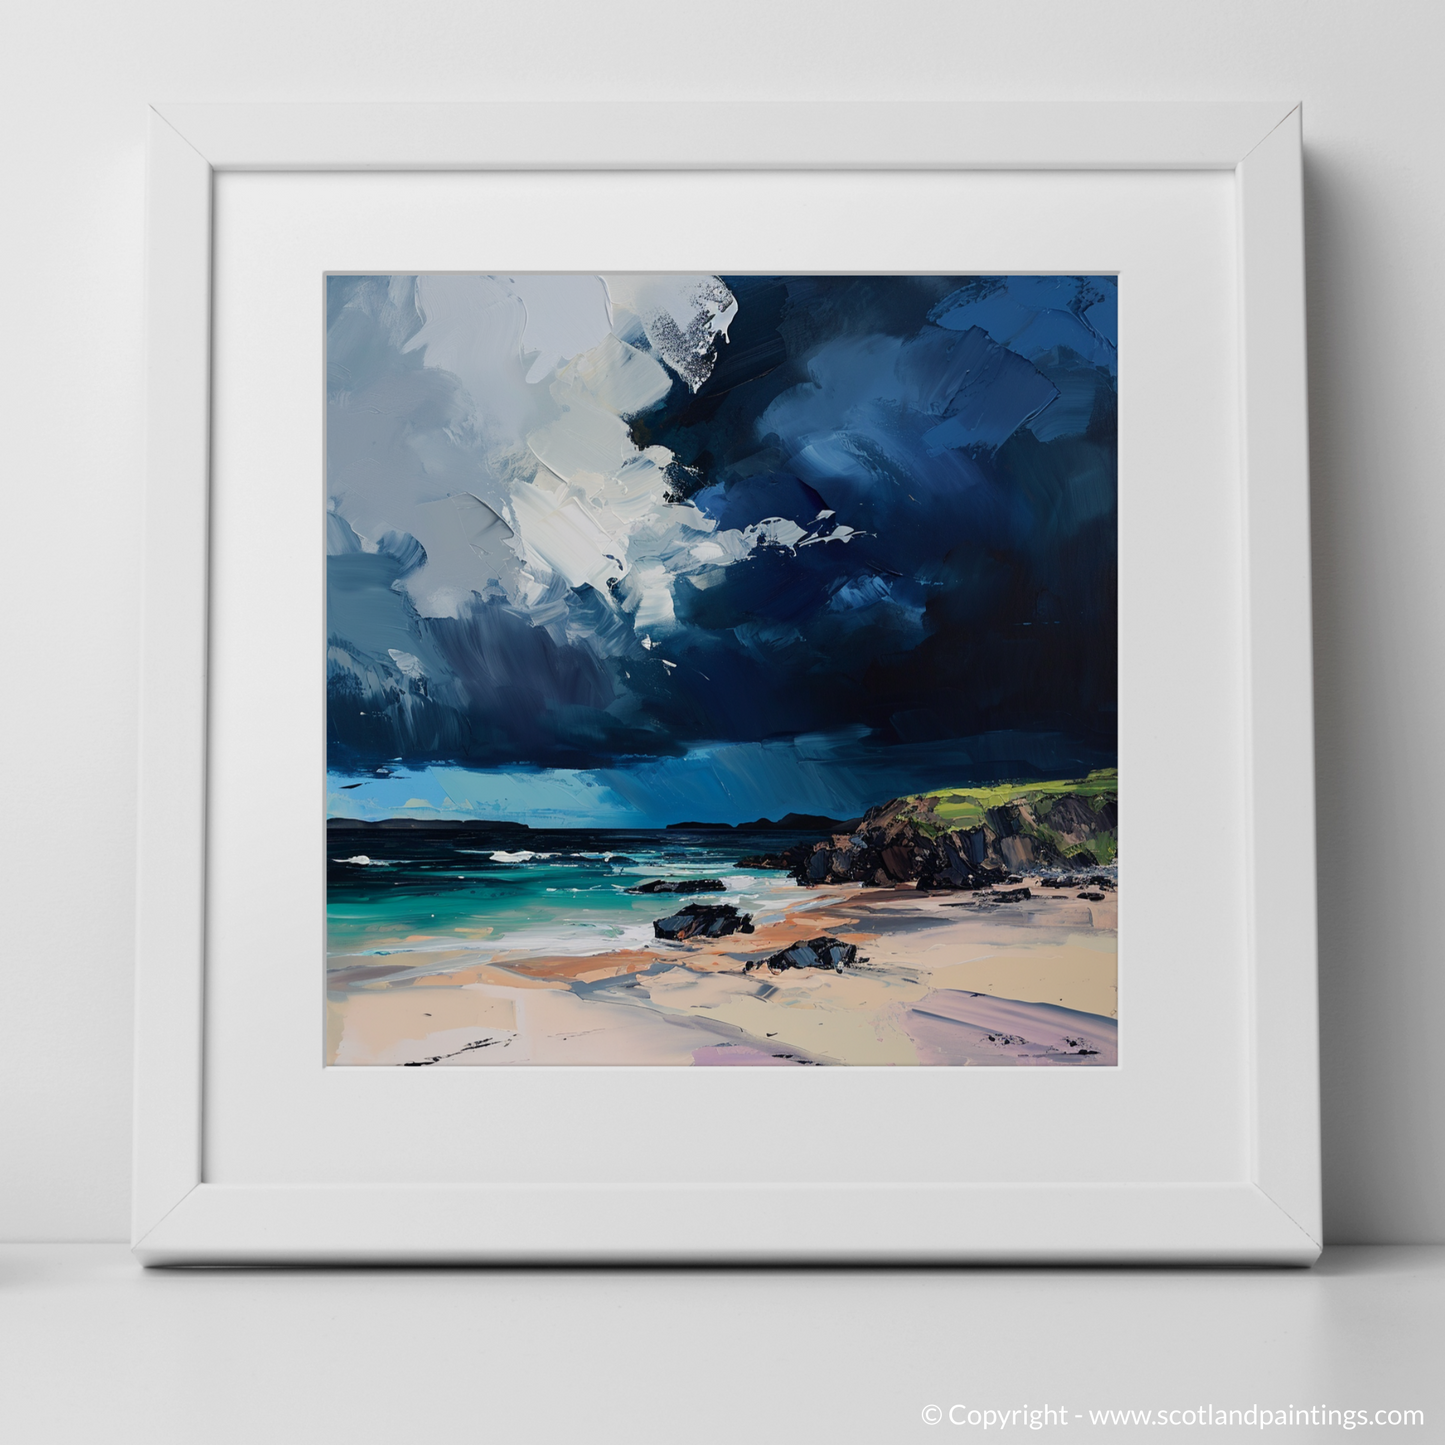 Art Print of Balnakeil Bay with a stormy sky with a white frame